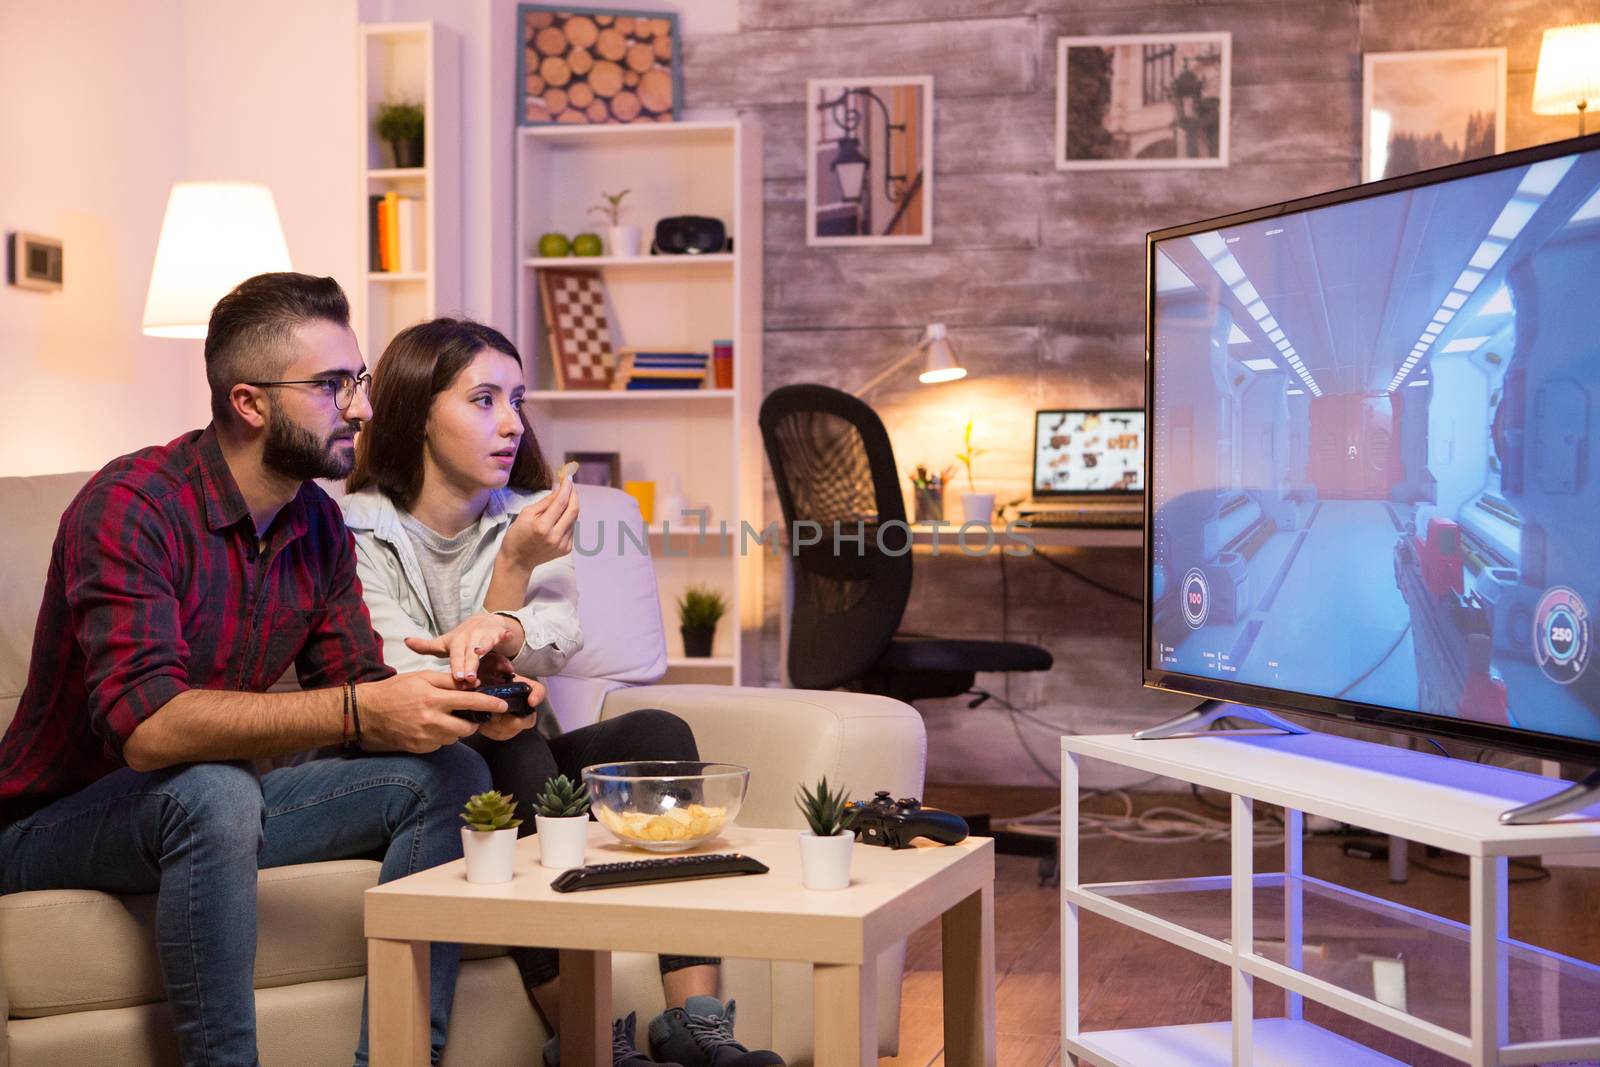 Boyfriend playing video games on television using controller by DCStudio